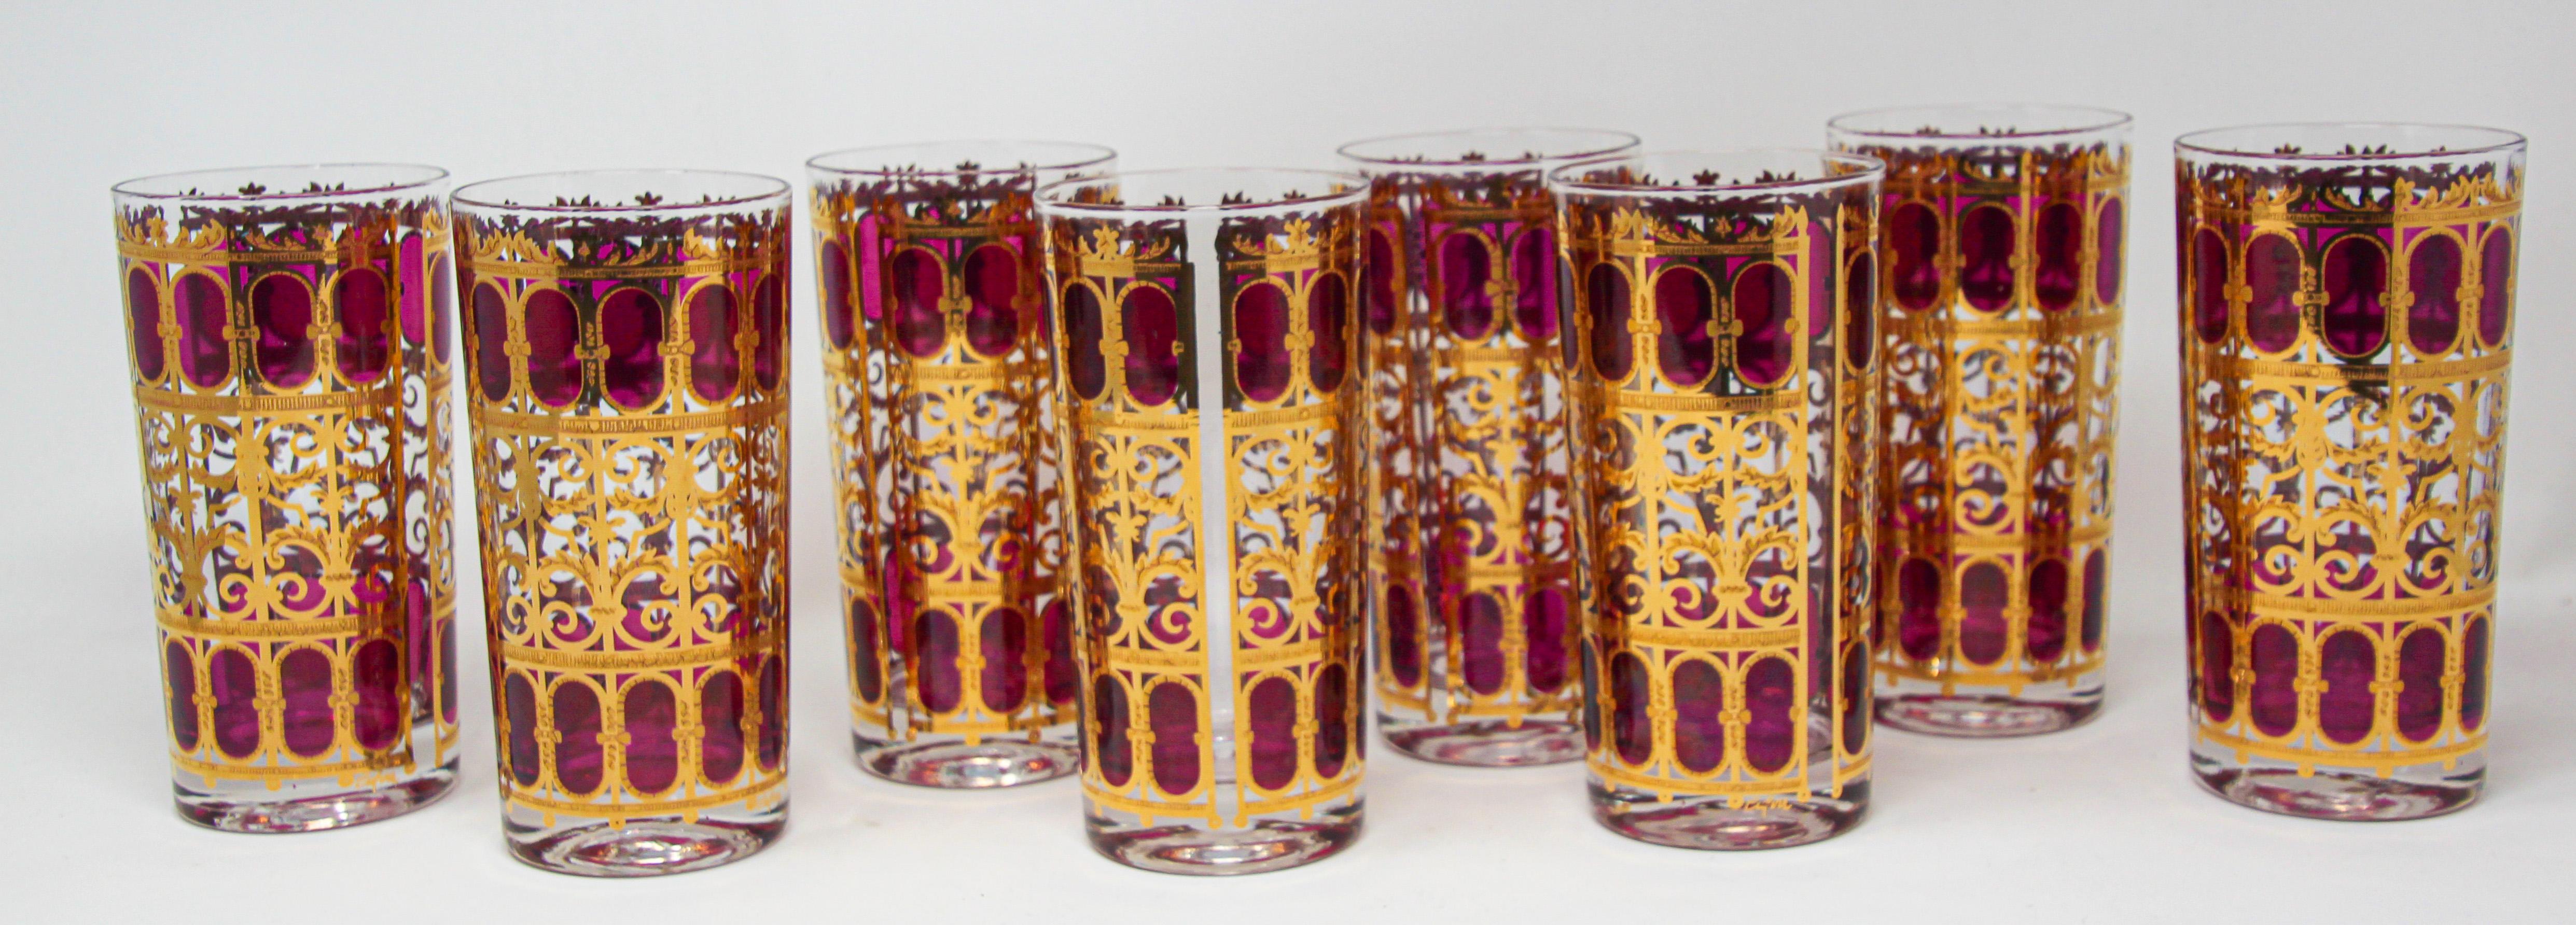 Vintage Culver Glasses with 22-Karat Gold and Red Moorish Design Set of Eight  10